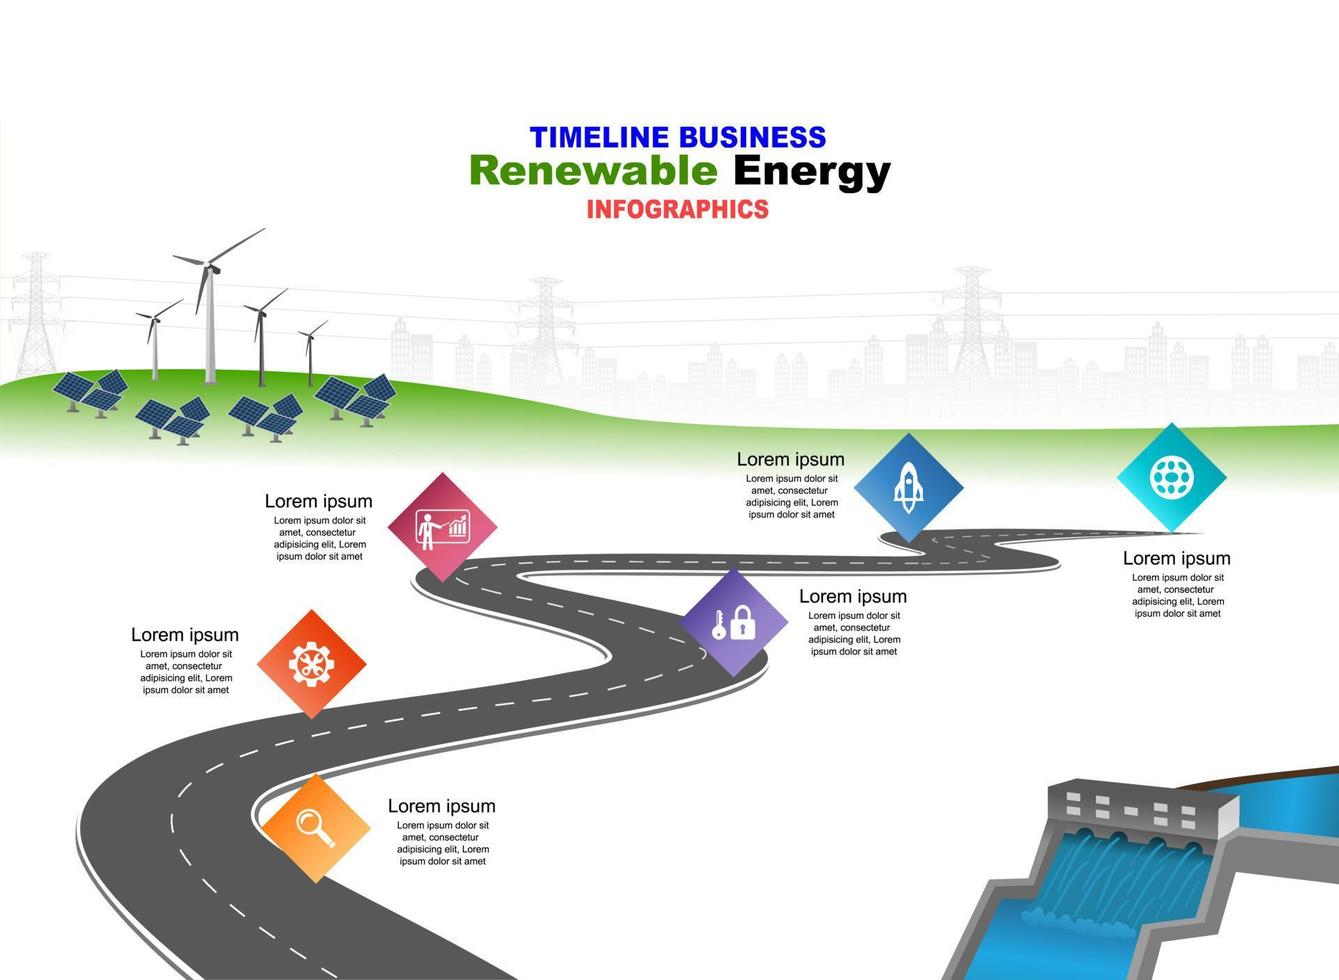 Vector template infographic Timeline of business operations with flags and placeholders on curved roads. Innovation, for environment and society city that can live together. Symbols, steps for success